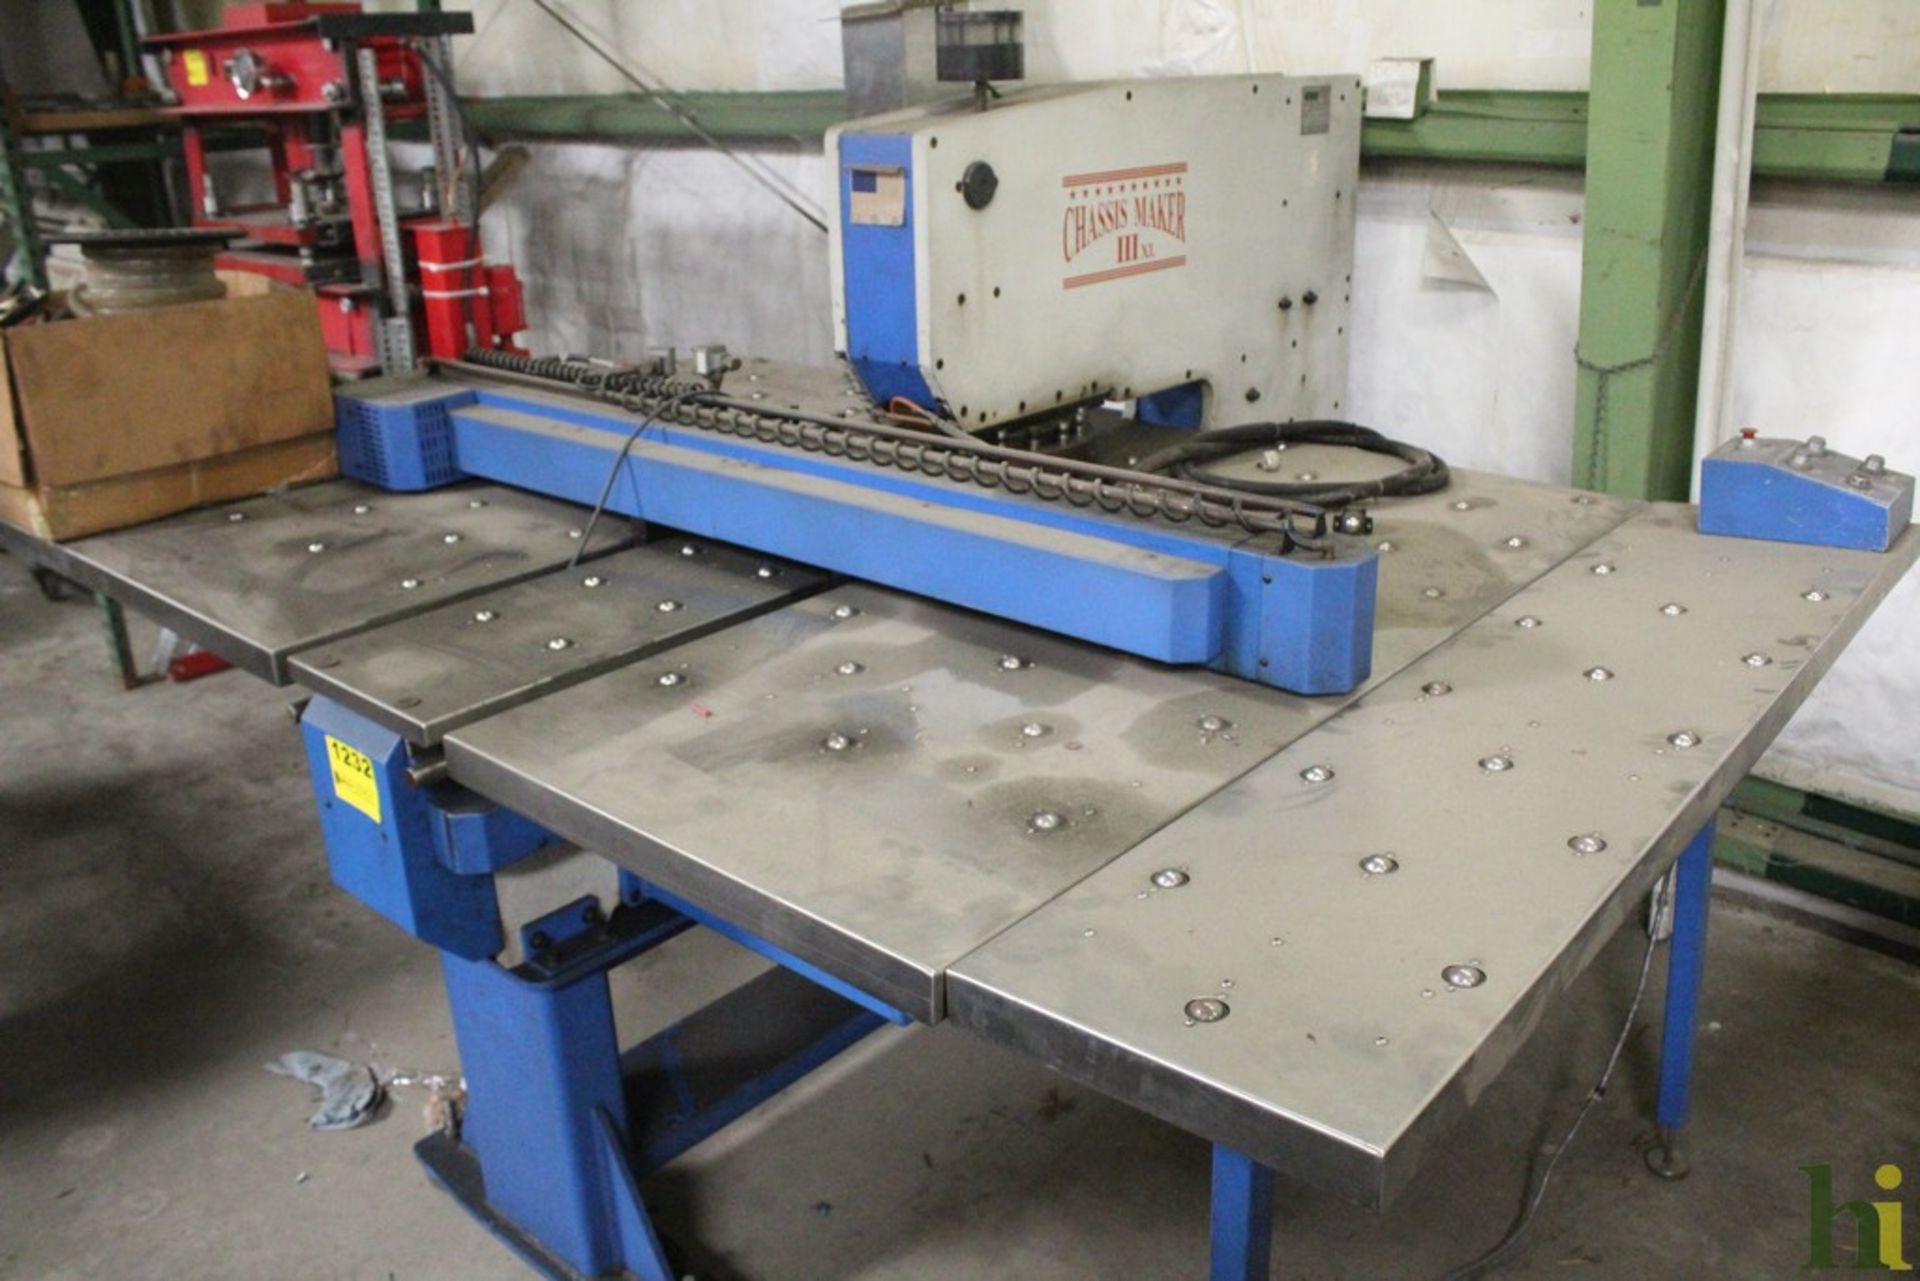 CHASSIS MAKER IIIXL TURRET PUNCH, S/N 971026 WITH POSITIONING TABLE